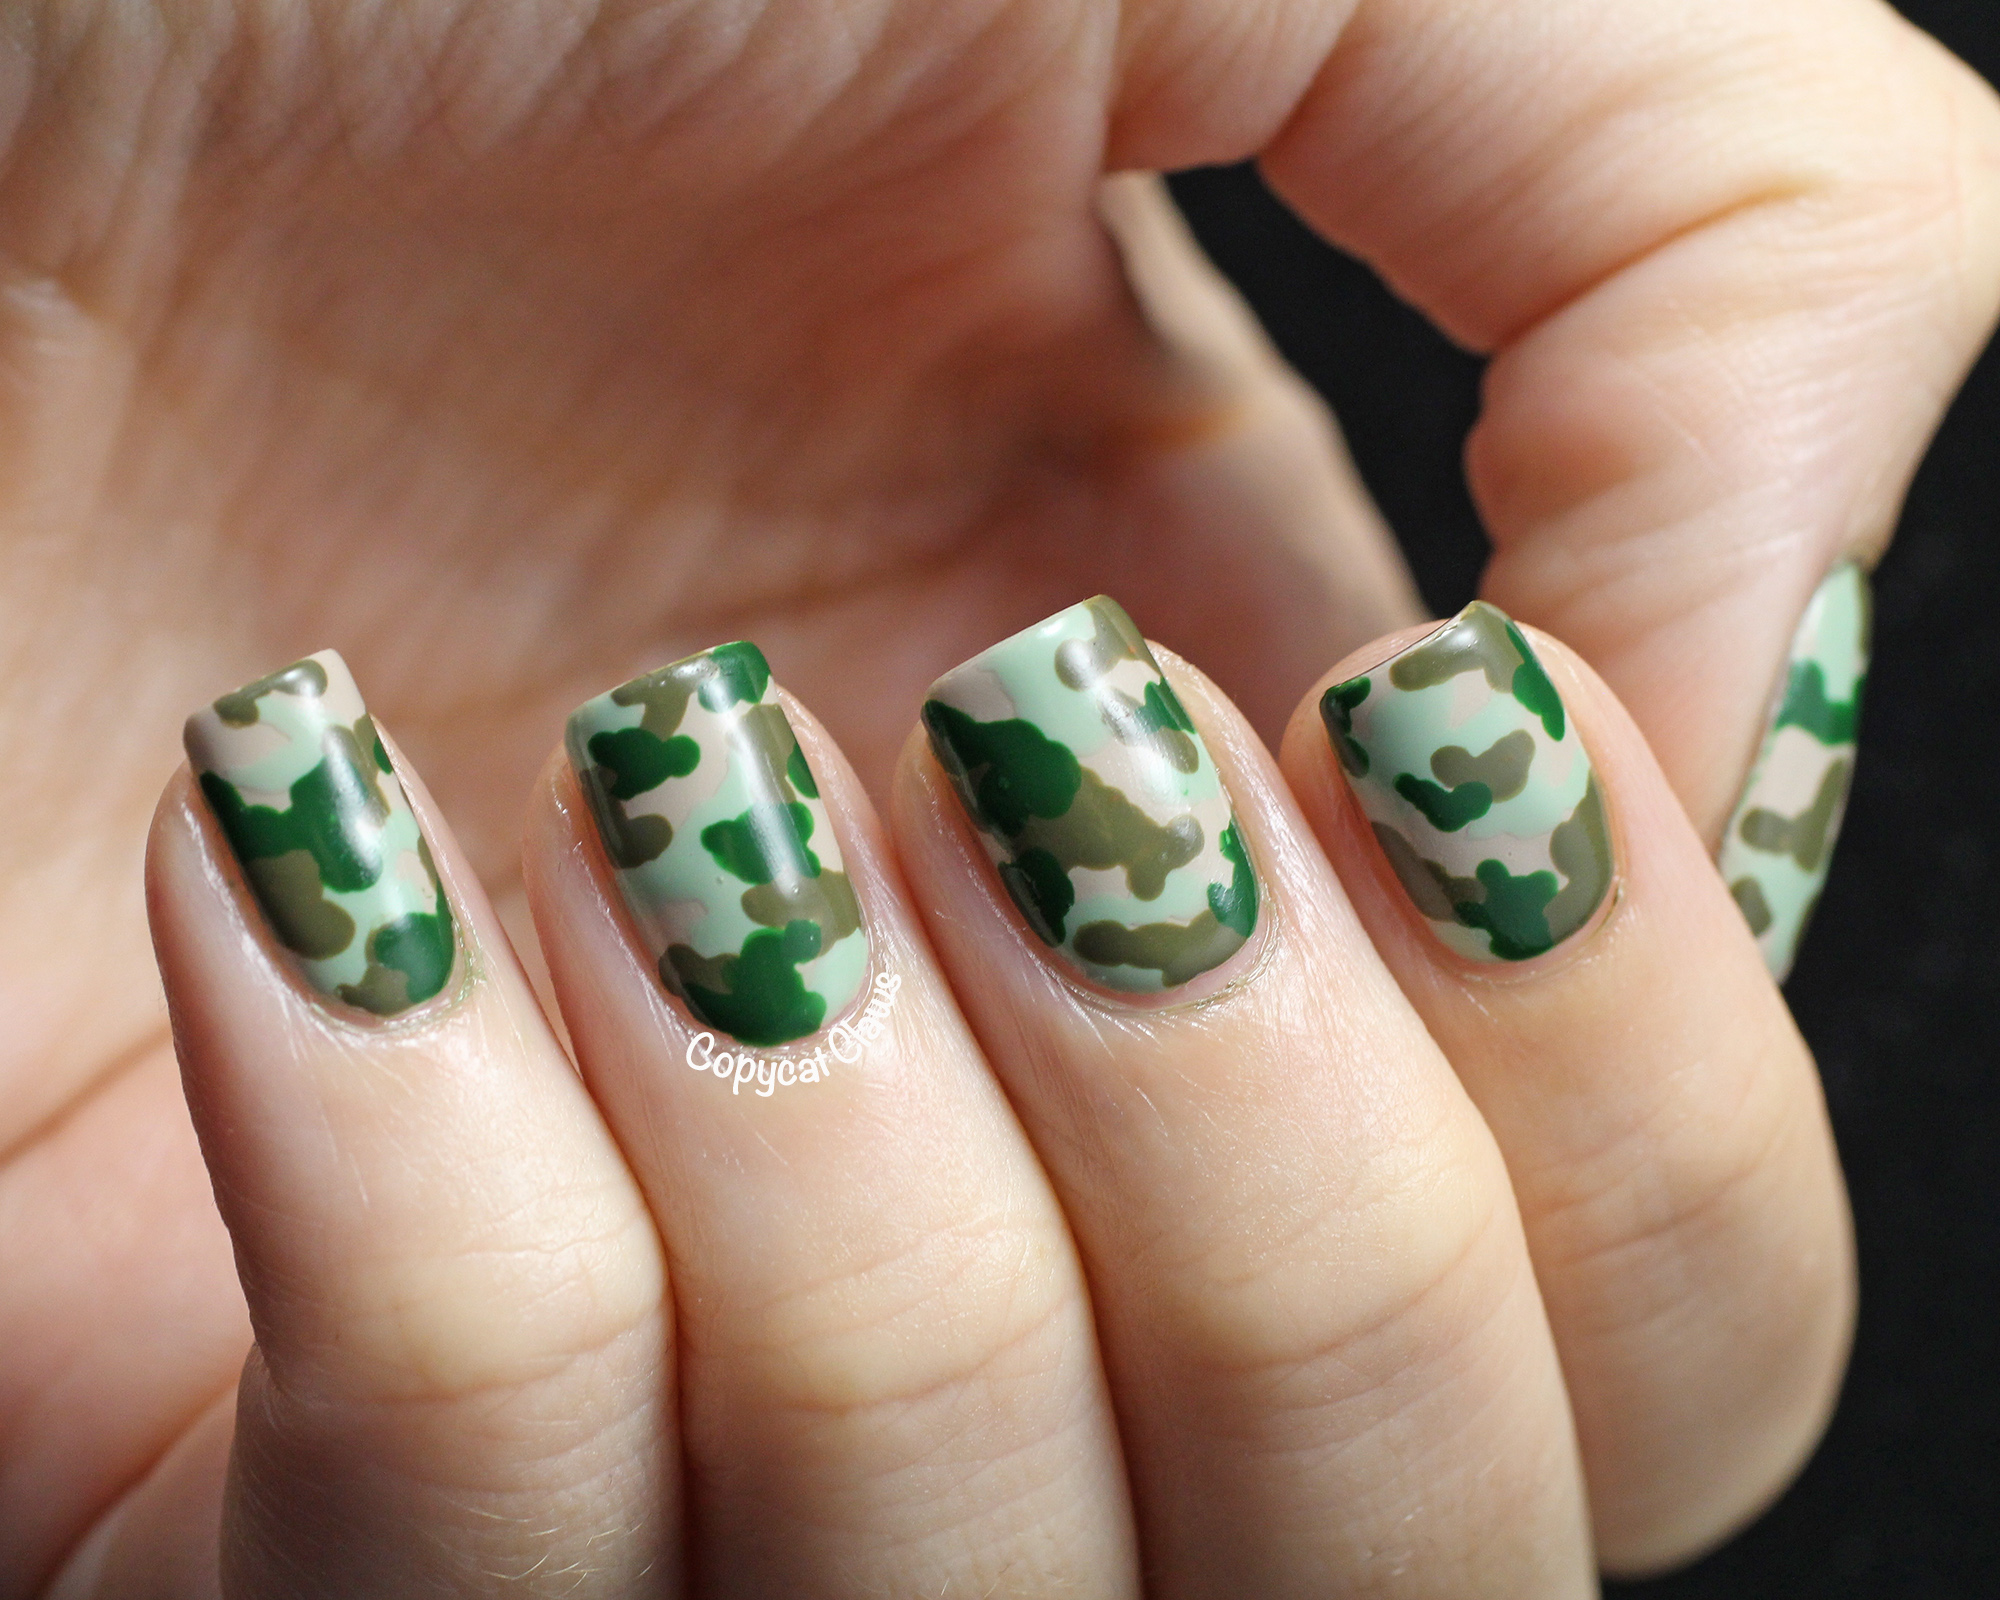 5. Camouflage Nail Designs for Men - wide 5